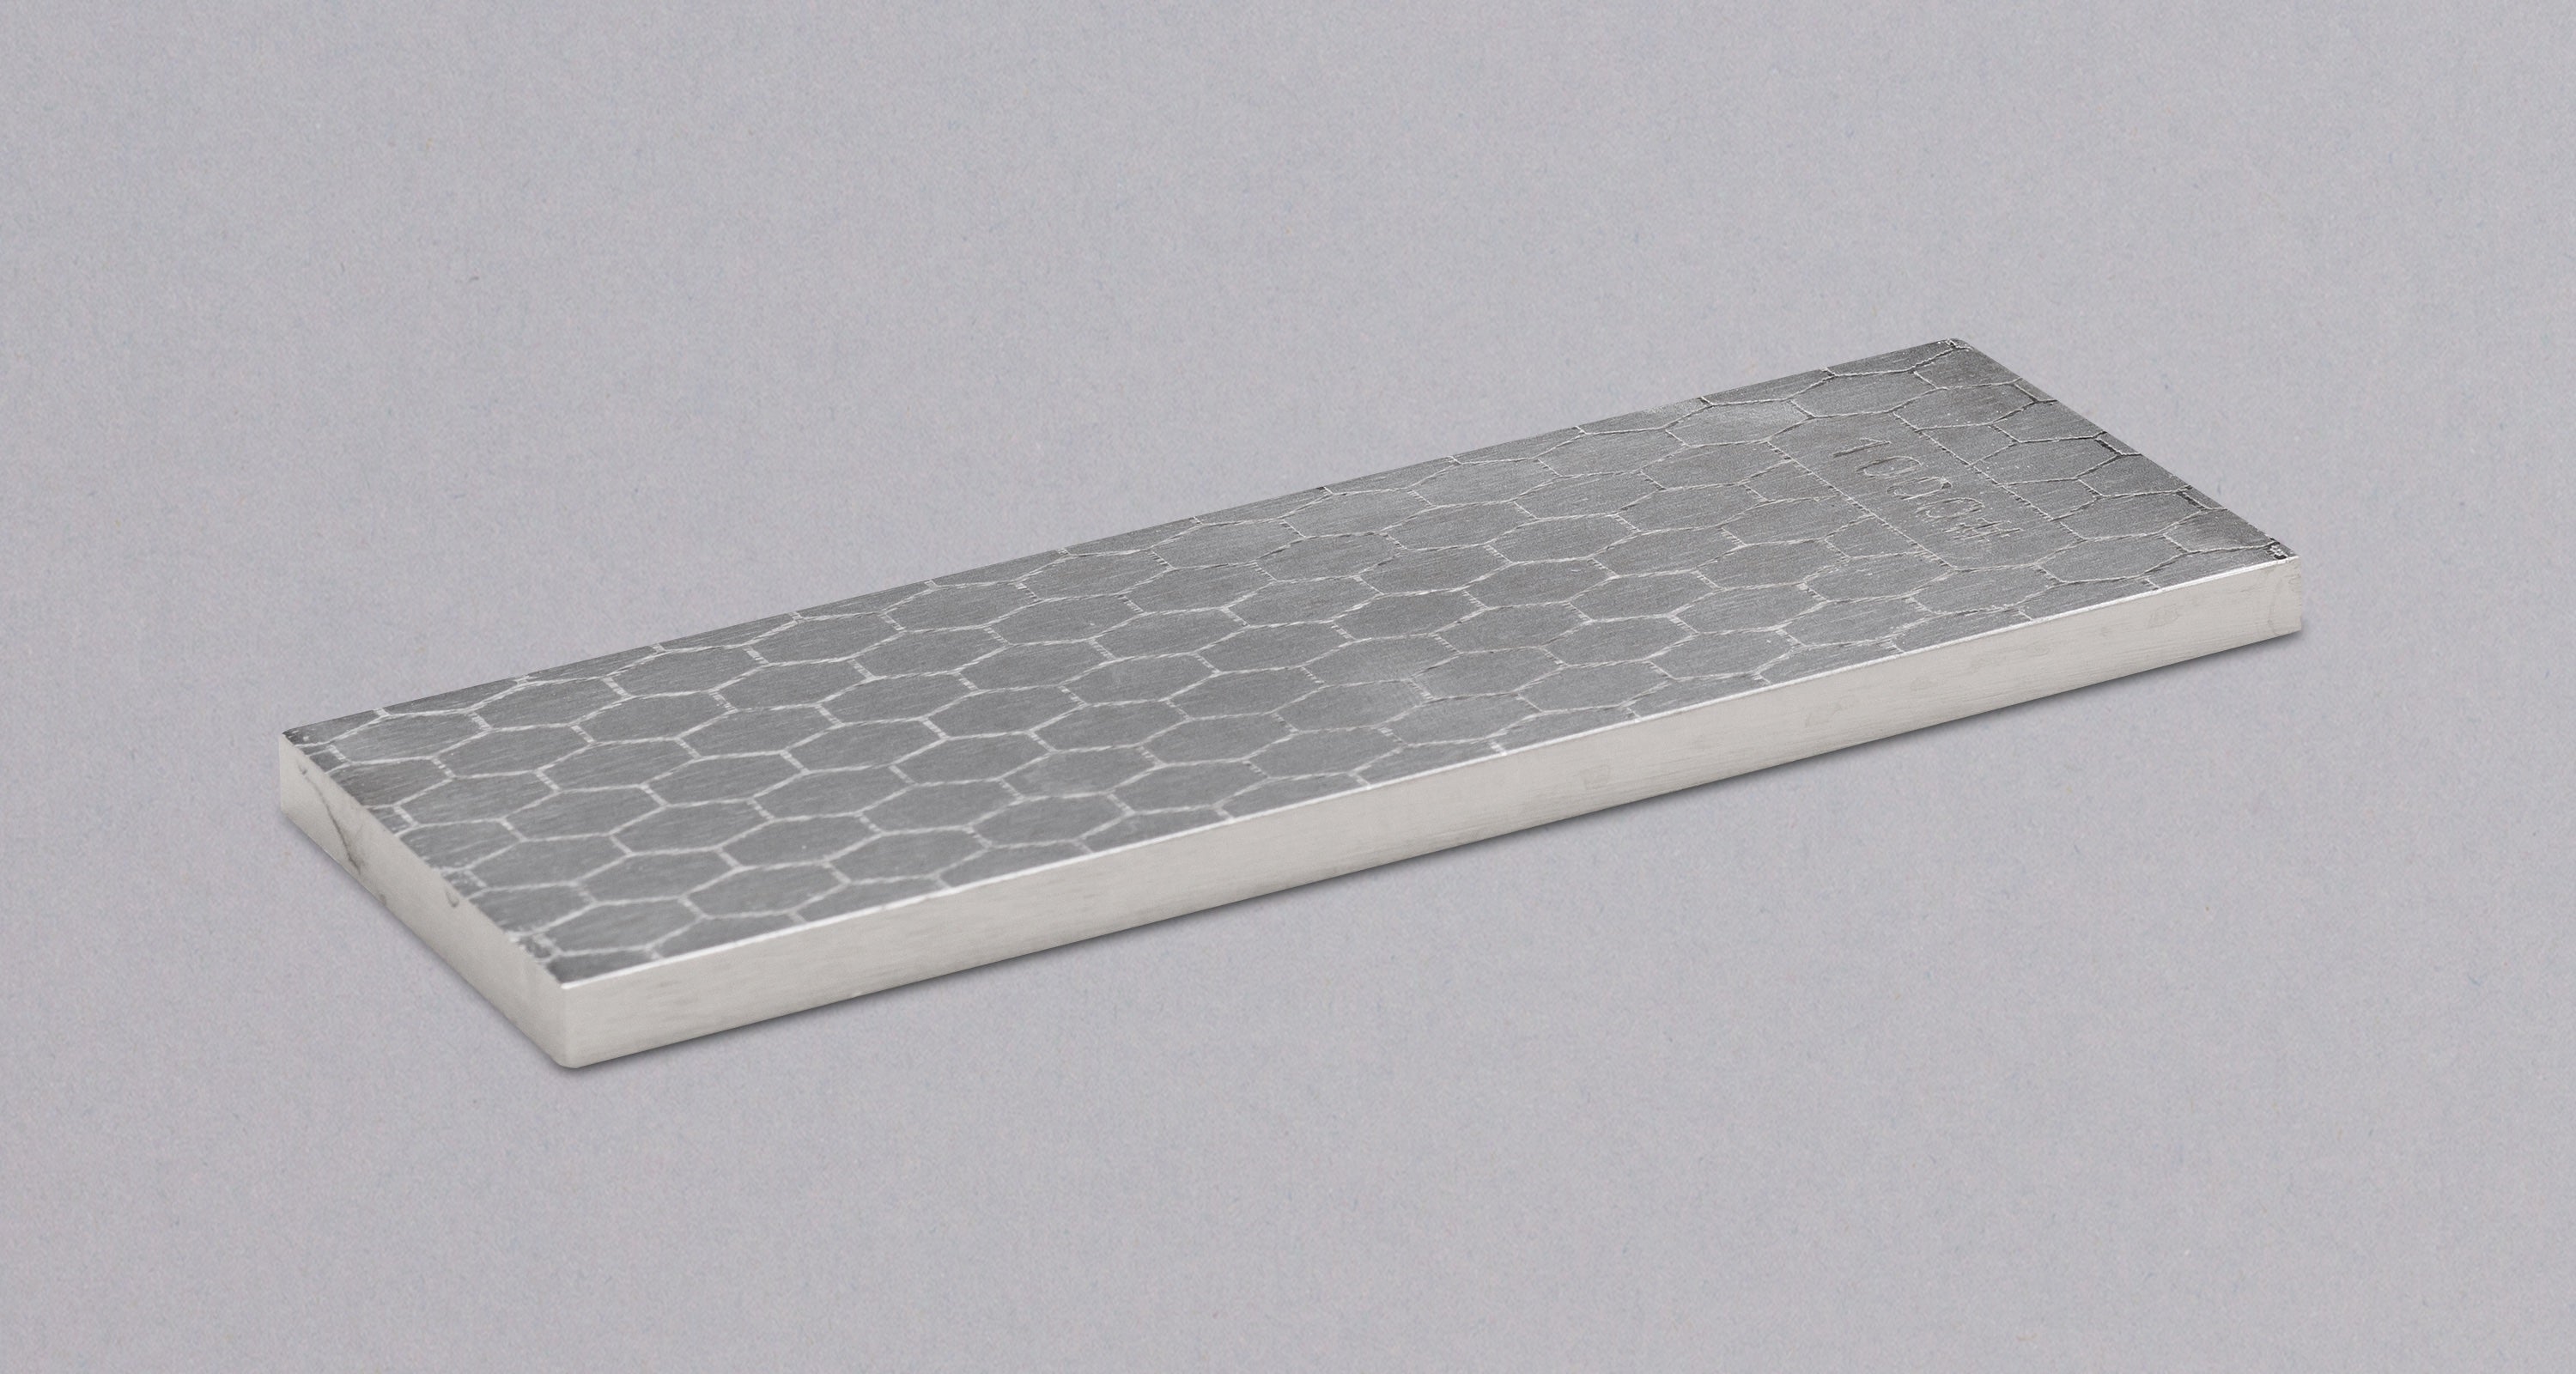 Double-Sided Diamond Sharpening Stone, with Base(400/1000 Grit) 